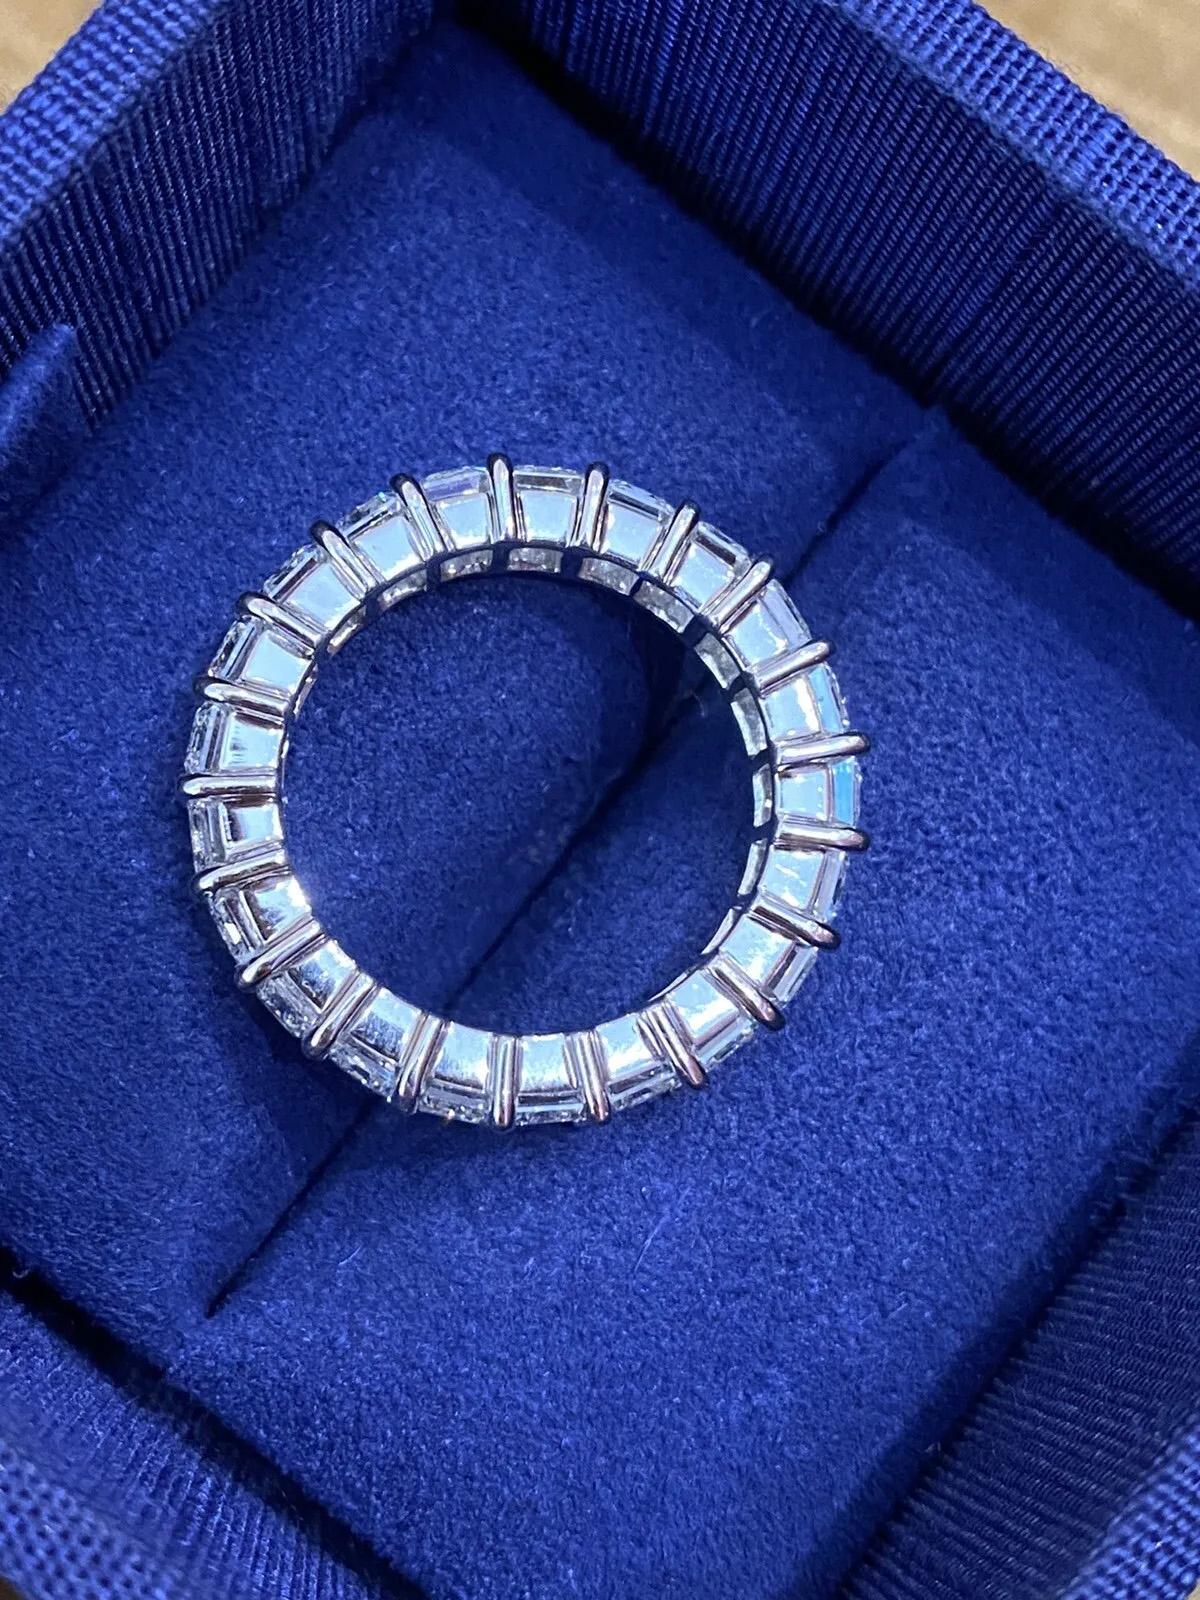 Emerald Cut Diamond Eternity Band Ring 6.40 Carats Total in Platinum Size 6.25 In Excellent Condition For Sale In La Jolla, CA